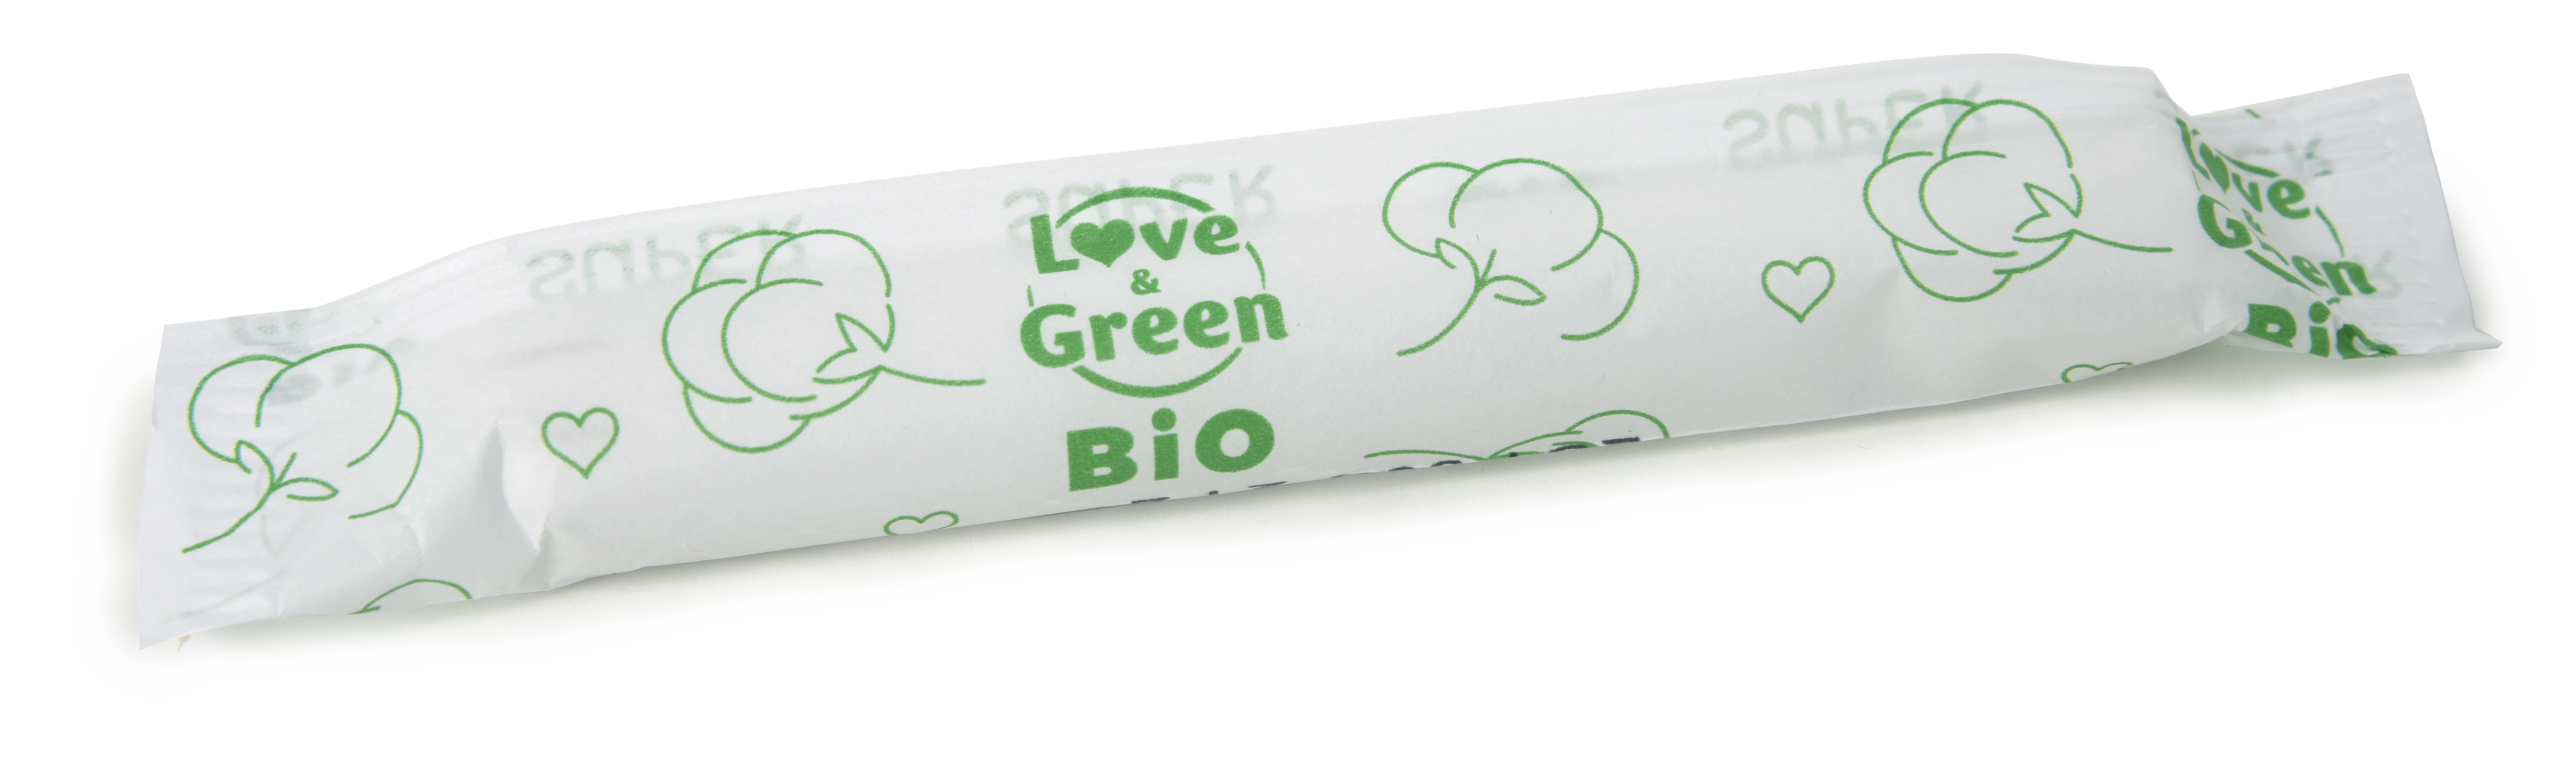 Love and Green  Lingettes intimes - aloe vera - Dentimed - A Swiss Hygiene  Company